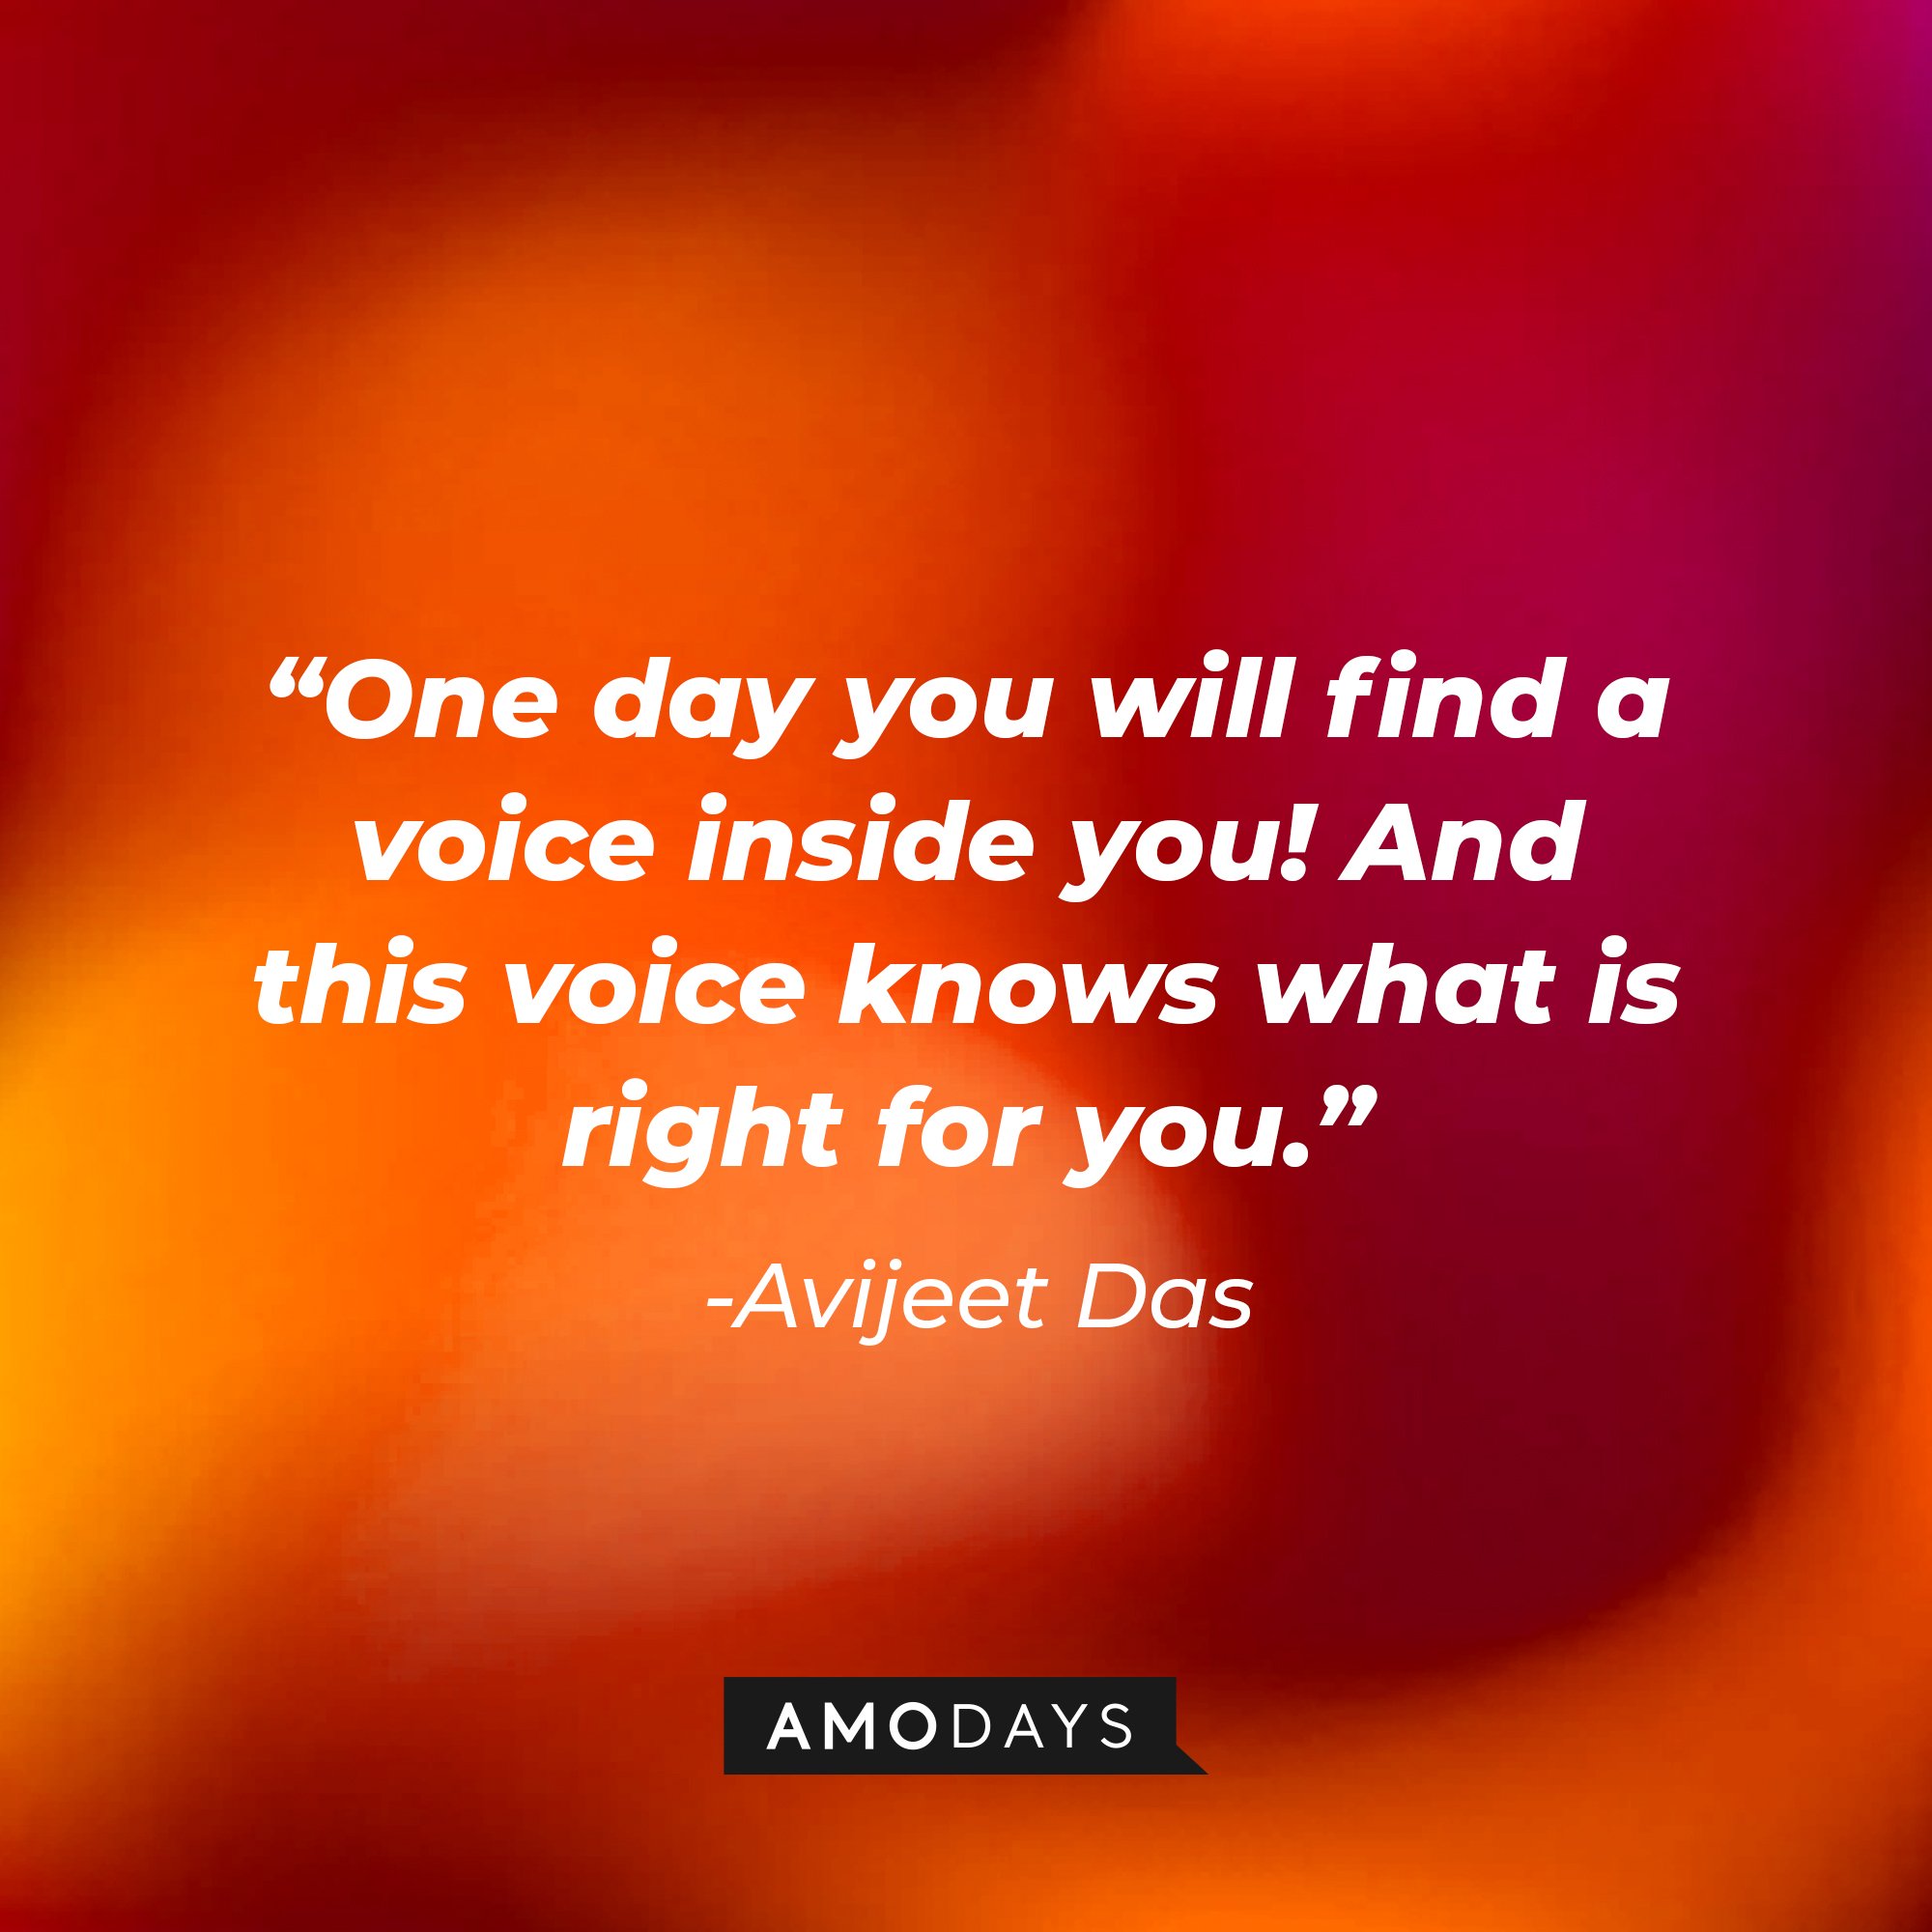 Avijeet Das' quote: "One day you will find a voice inside you! And this voice knows what is right for you." | Image: AmoDays